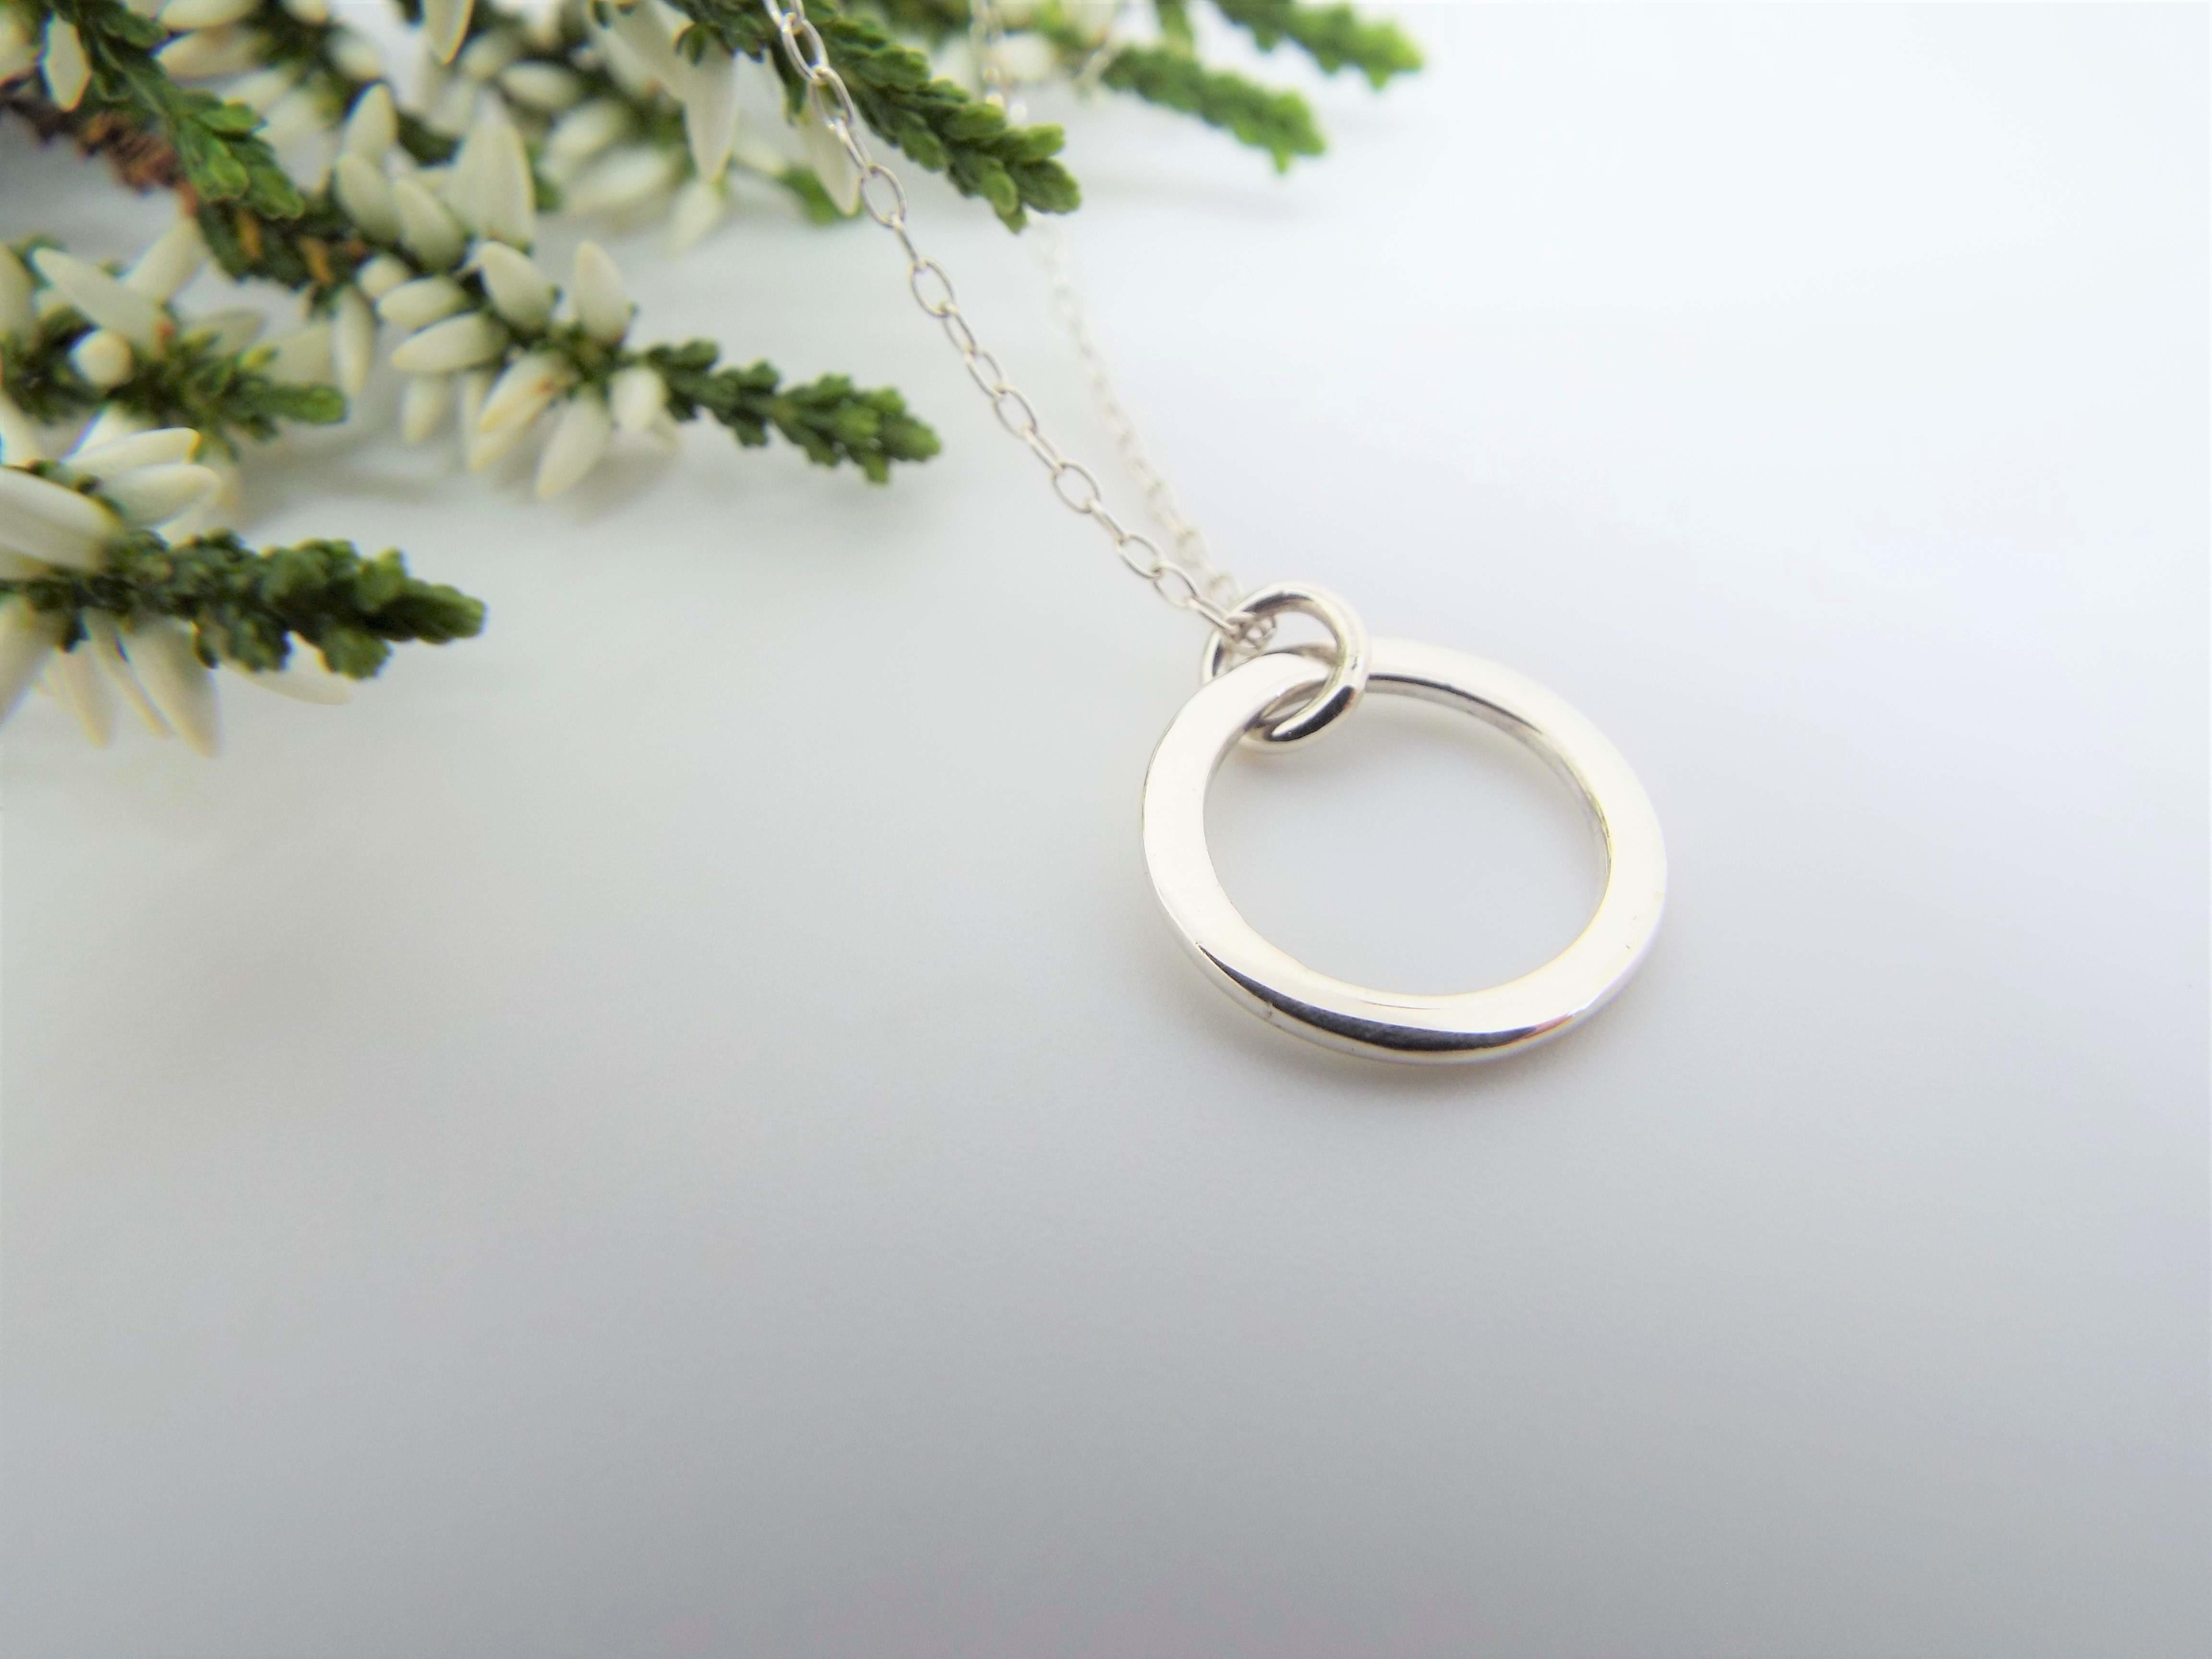 dainty silver circle pendant necklace on a chain